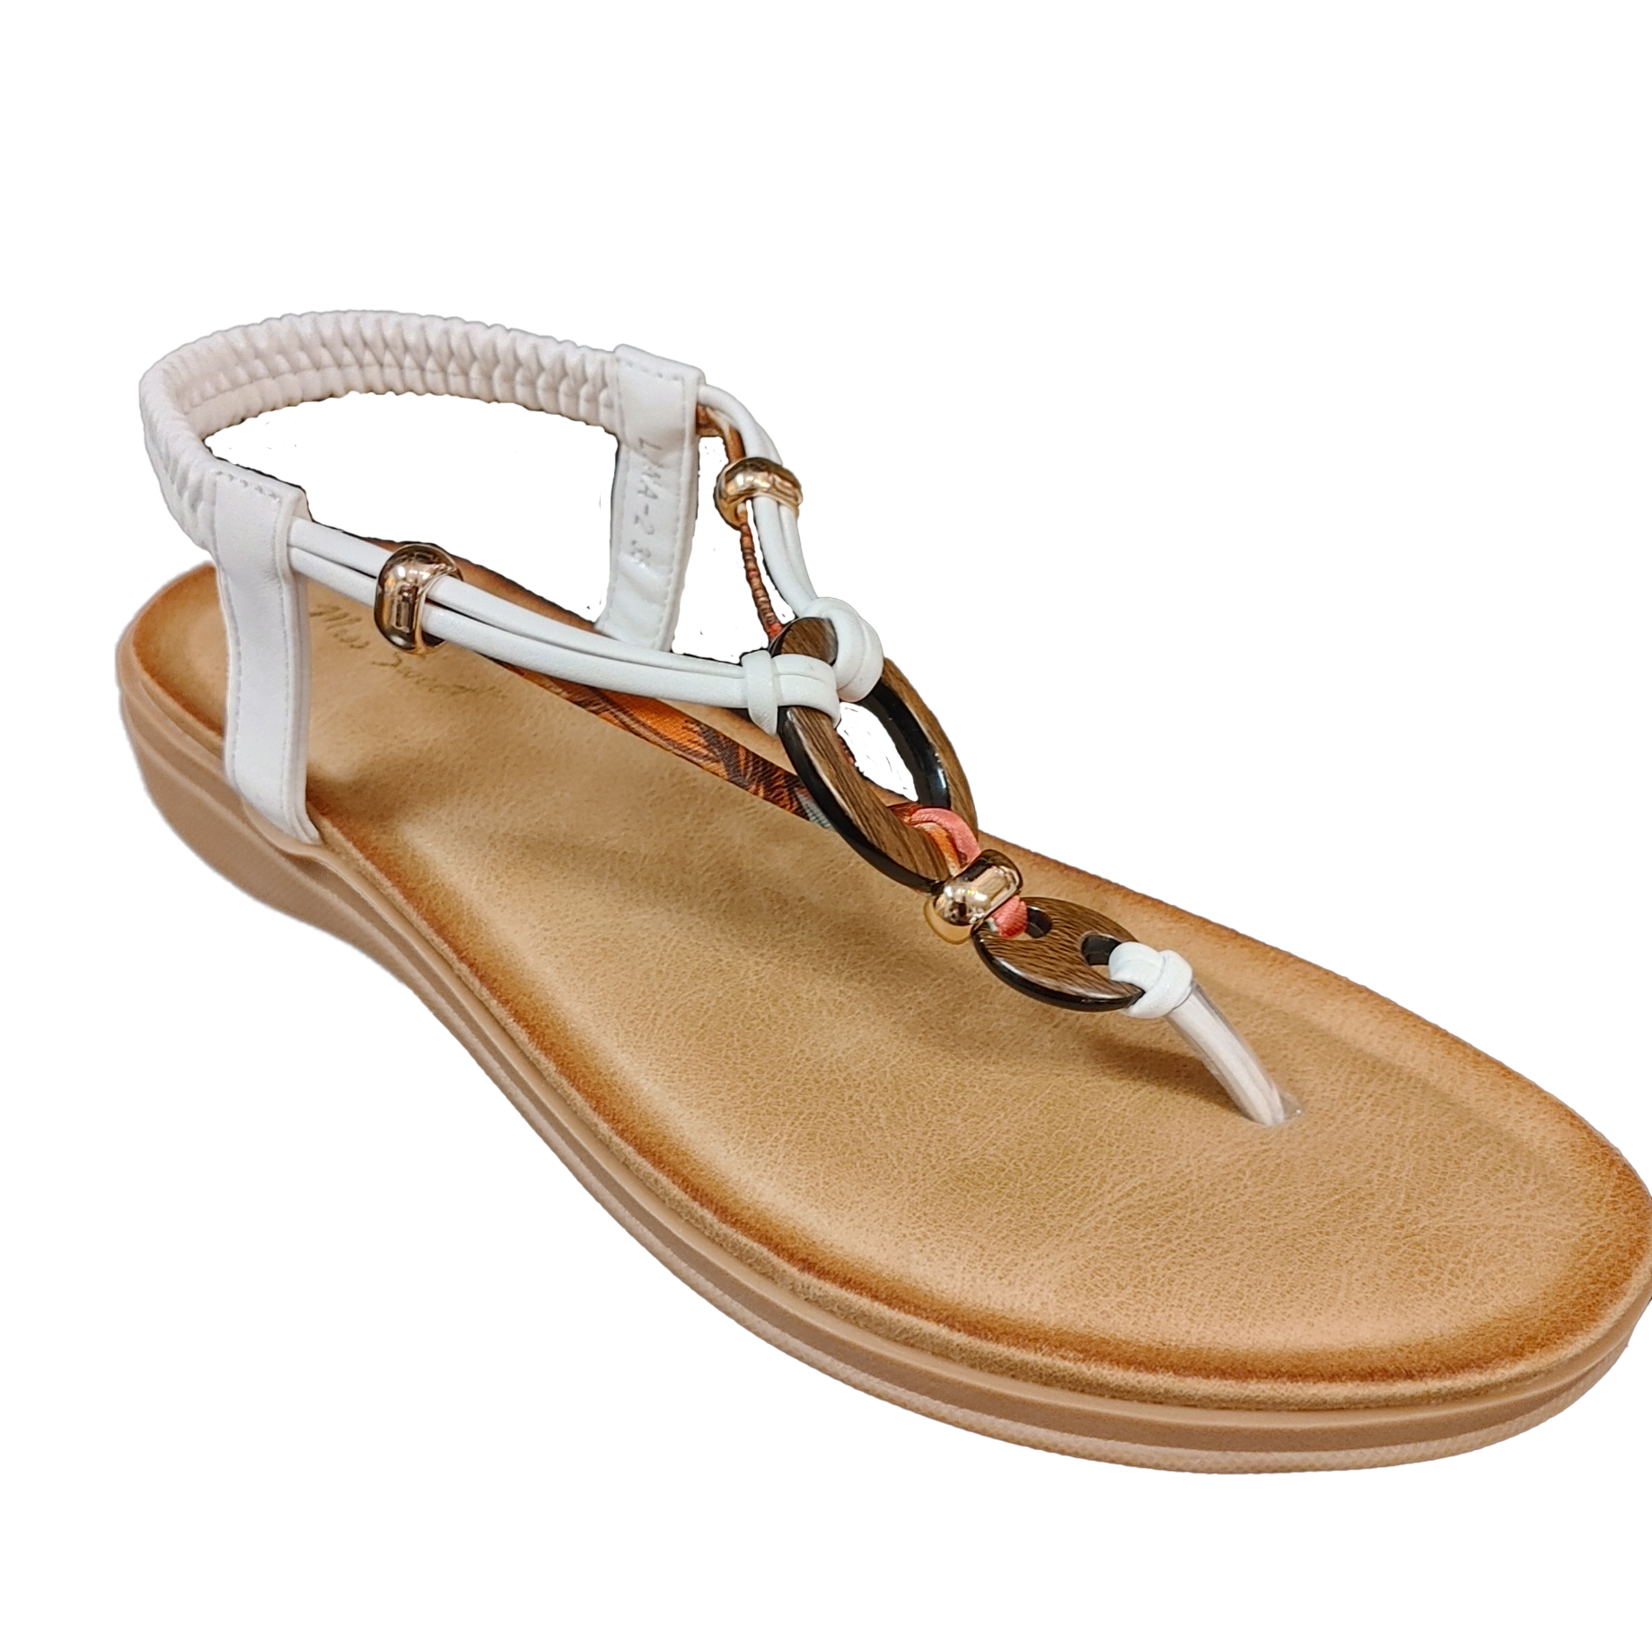 Miss Sweet Miss Sweet flat thong sandal with beads and wood detail, sandals